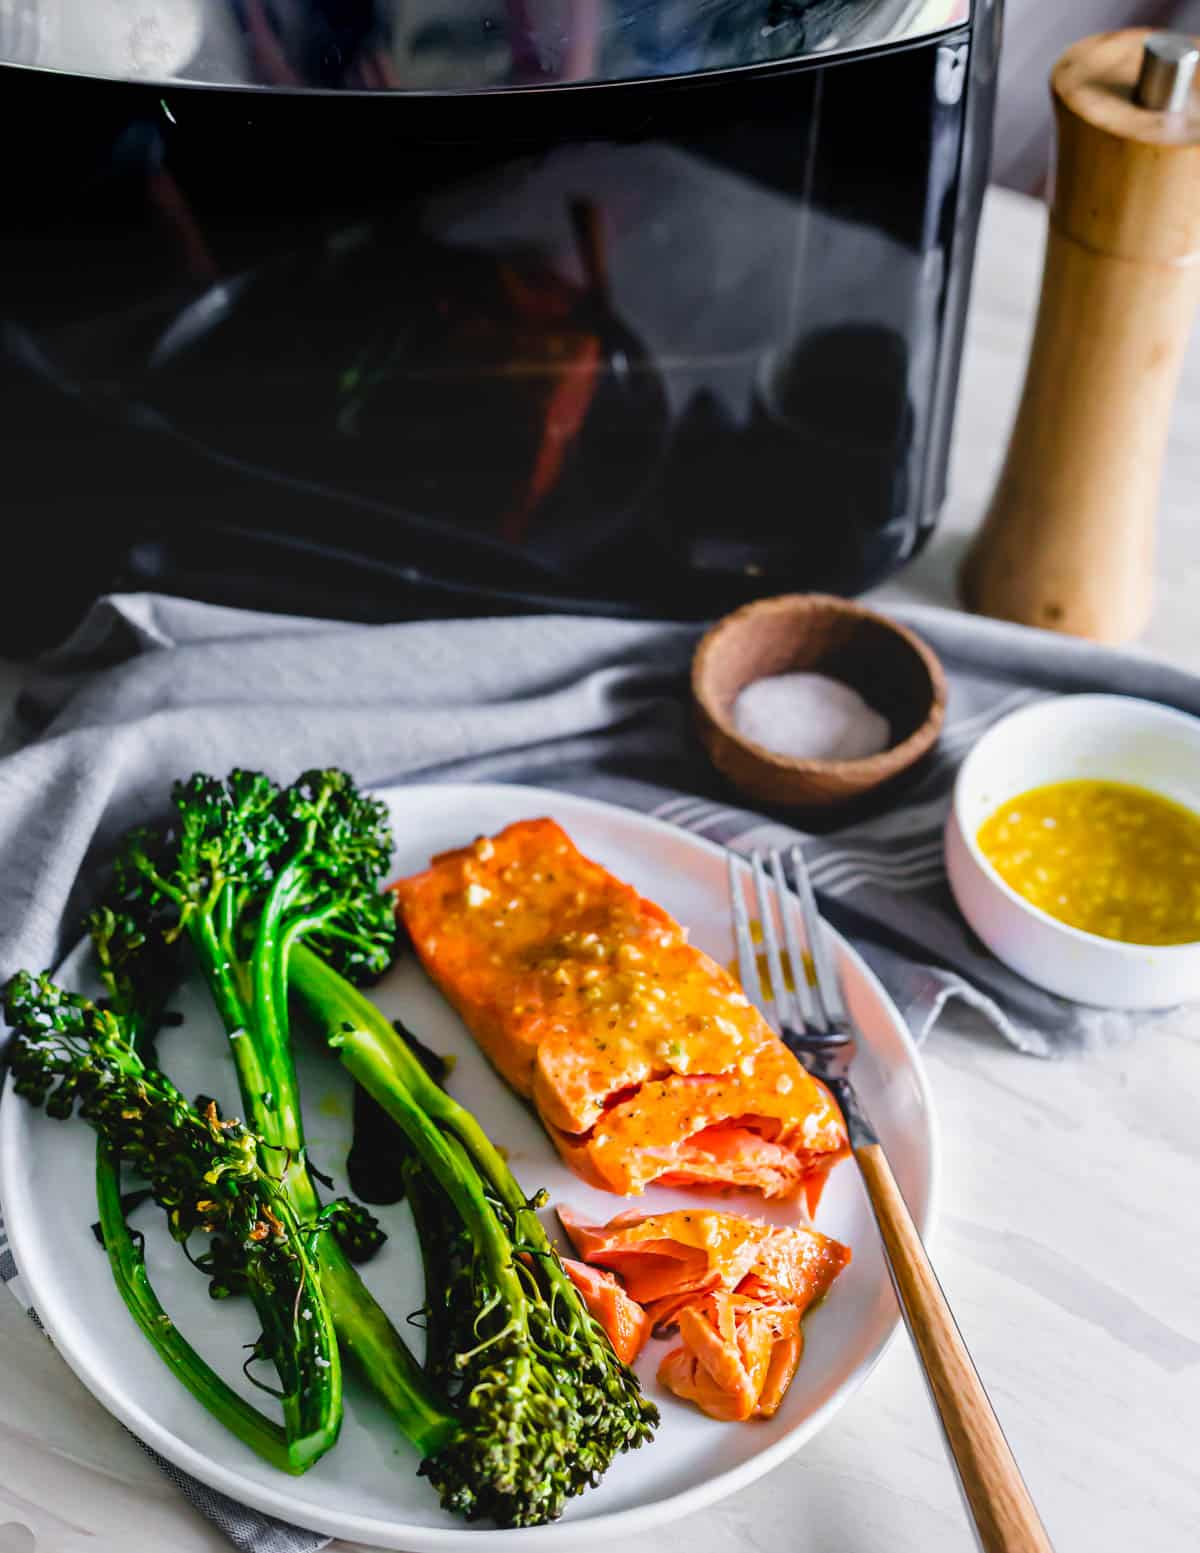 Frozen salmon filet cooked in a Pampered Chef air fryer on a plate with broccolini and maple mustard sauce on the side.